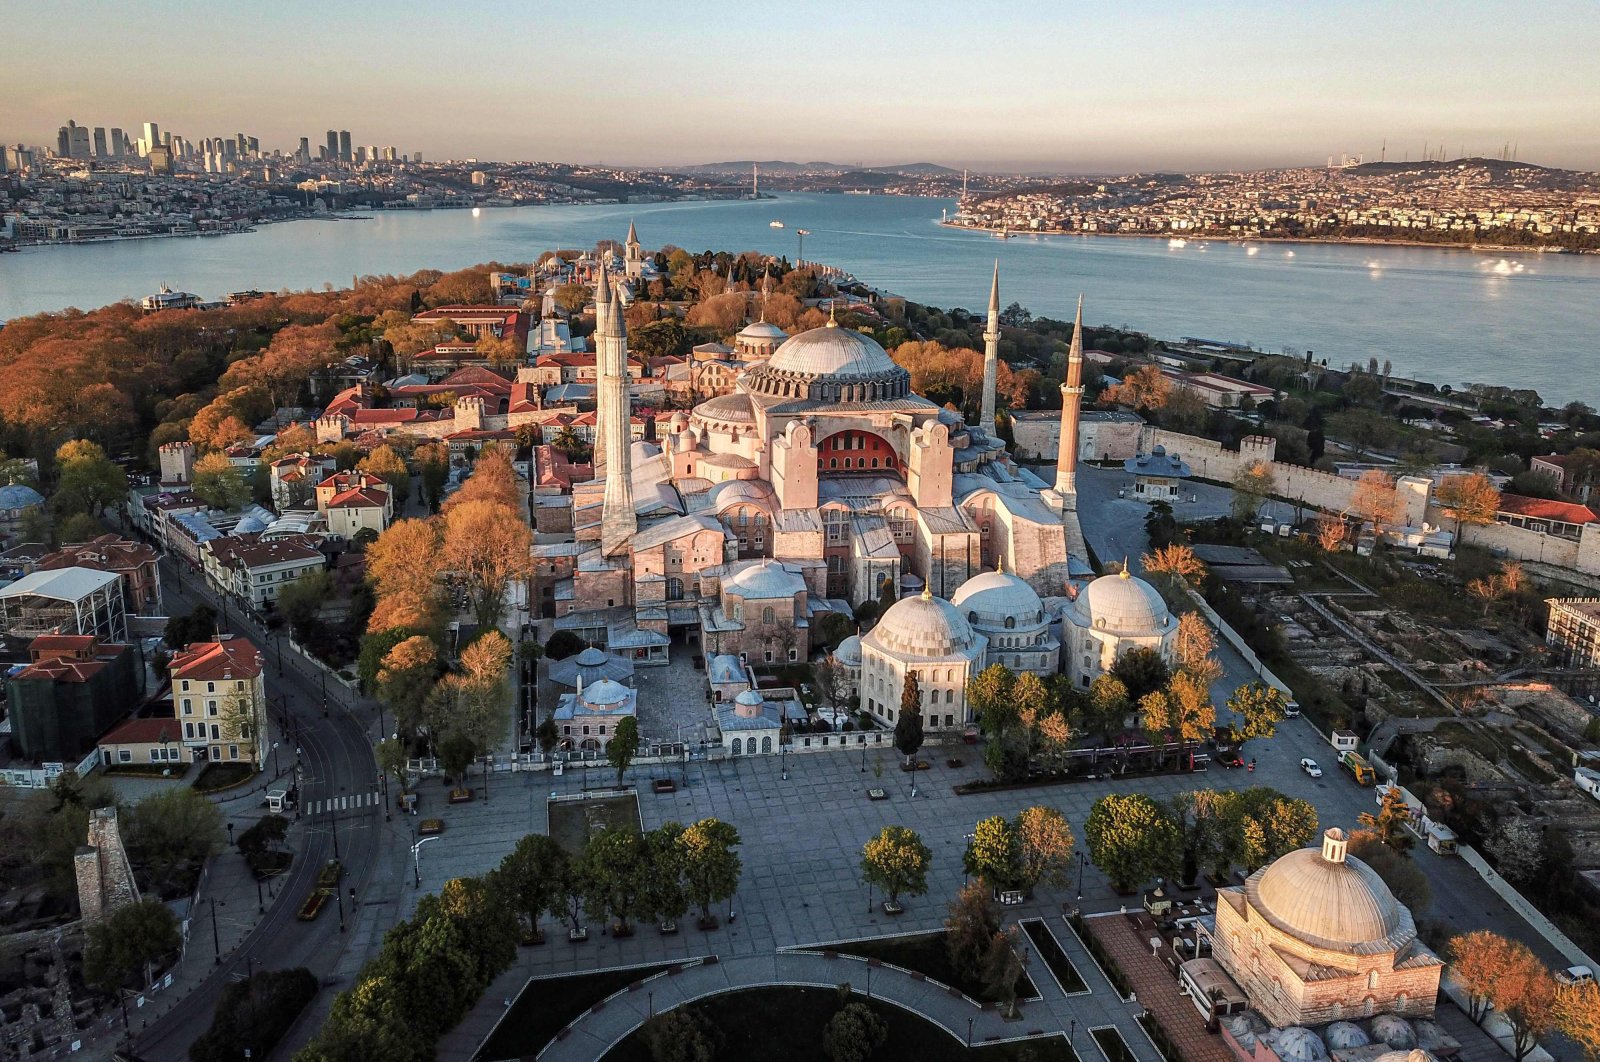 This aerial picture taken on April 25, 2020 shows the Hagia Sophia museum in Istanbul. (AFP Photo)